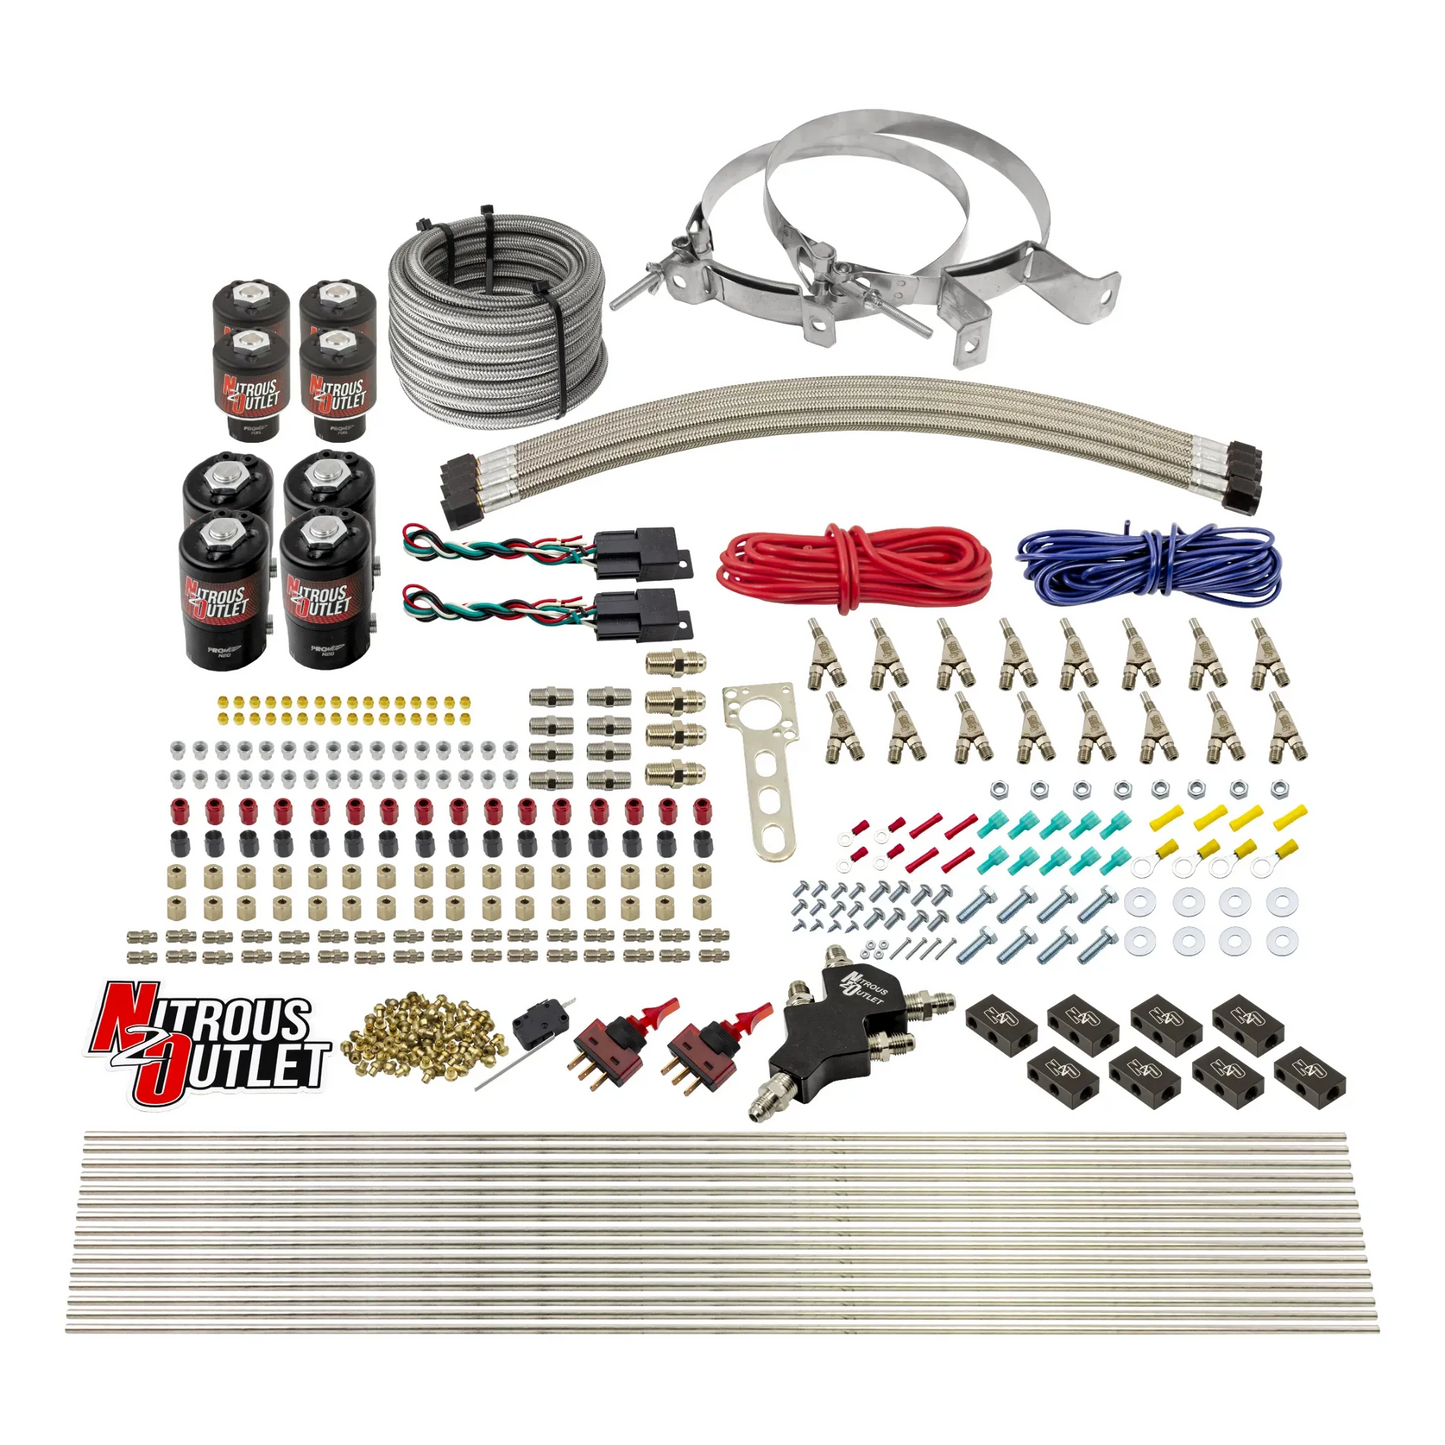 8 Cylinder Dual Stage Direct Port Nitrous System - .112 Nitrous/.177 Fuel Solenoids - Straight Blow Through Nozzles